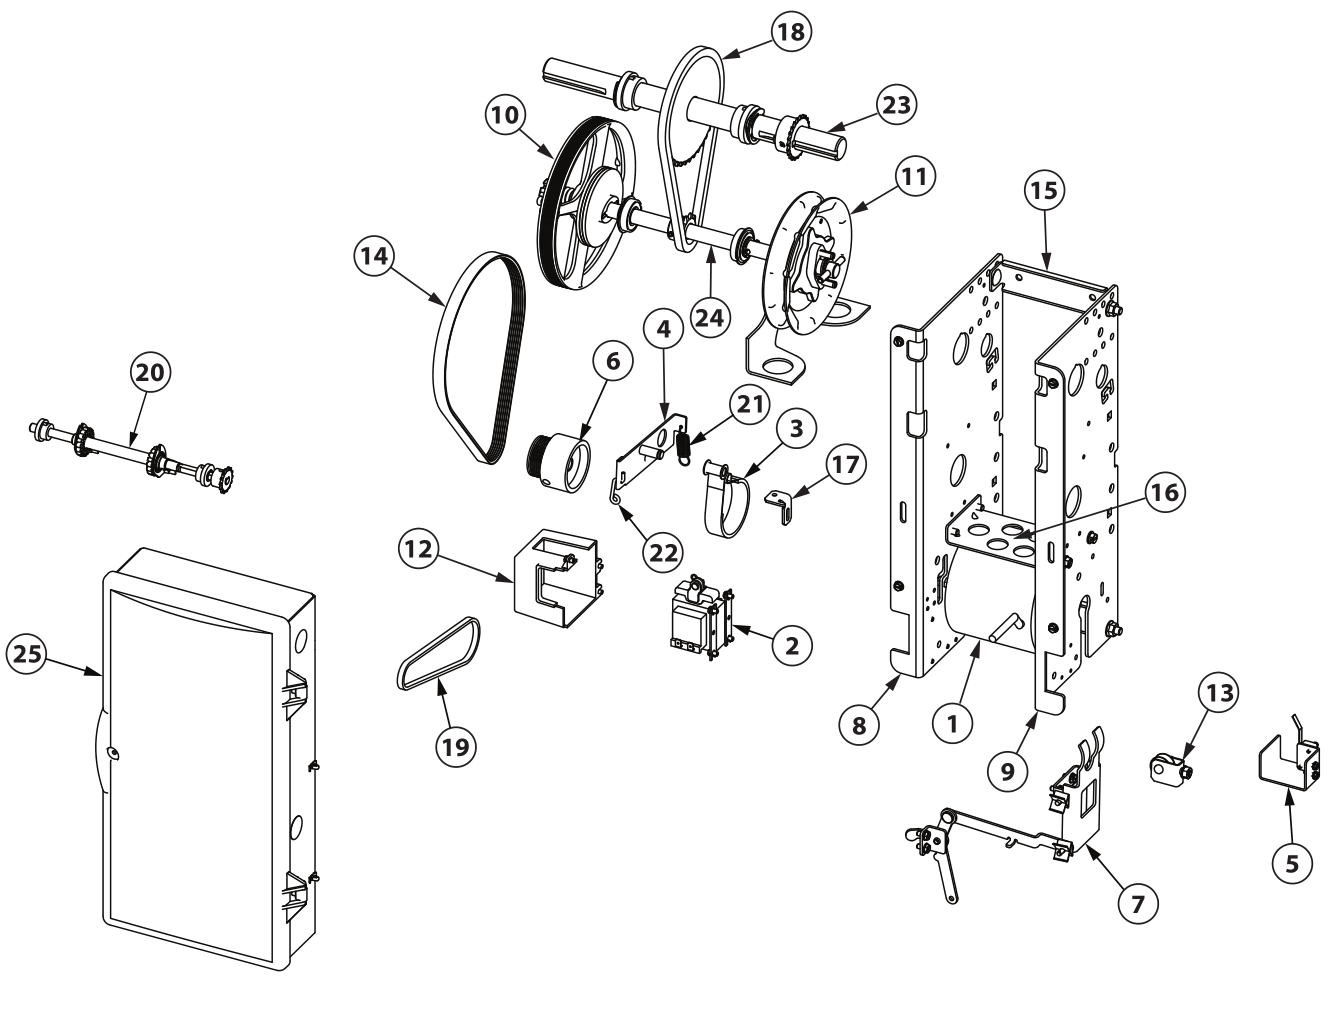 image-map-rmx-rolling-steel-operator-hoist-parts.png